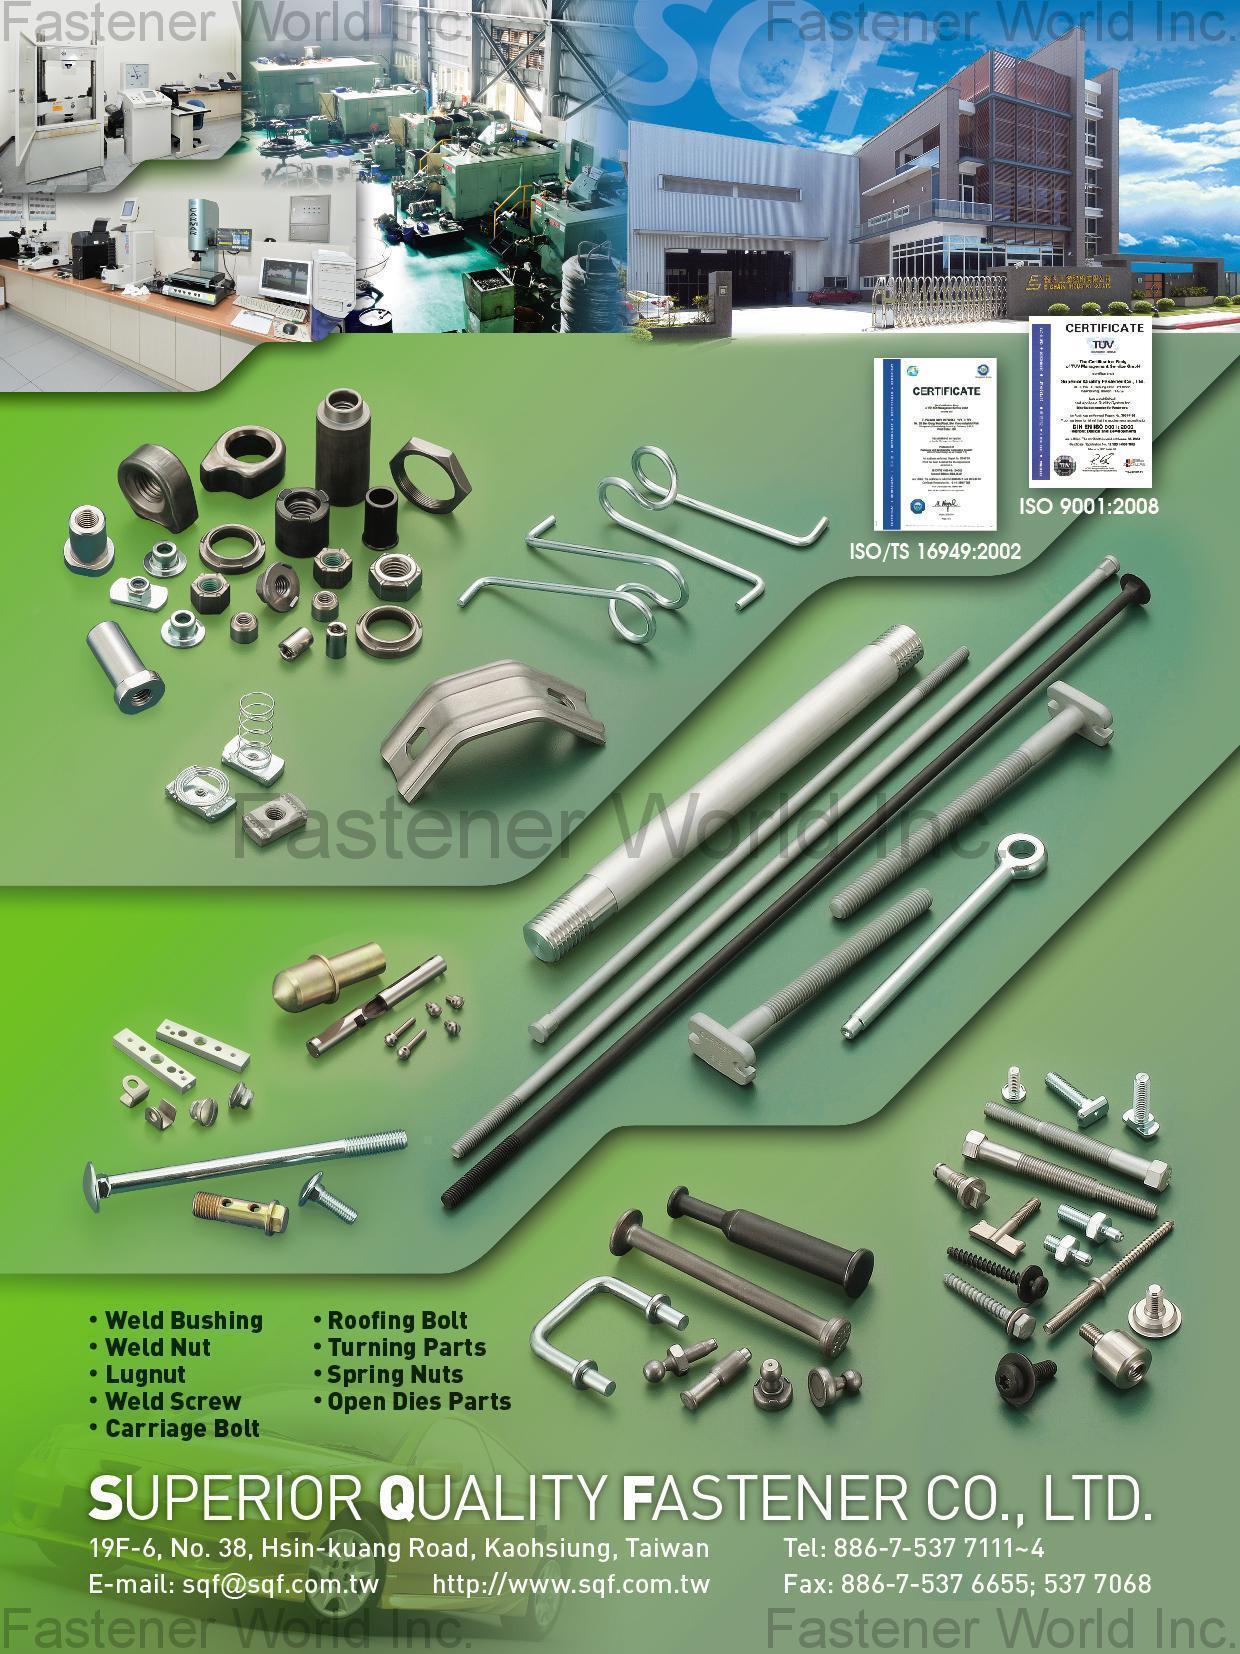 SUPERIOR QUALITY FASTENER CO., LTD.  , Weld Bushing, Weld Nut, Lug Nut, Weld Screw, Carriage Bolt, Roofing Bolt, Turning Parts, Spring Nuts, Open Dies Parts , Weld Screws